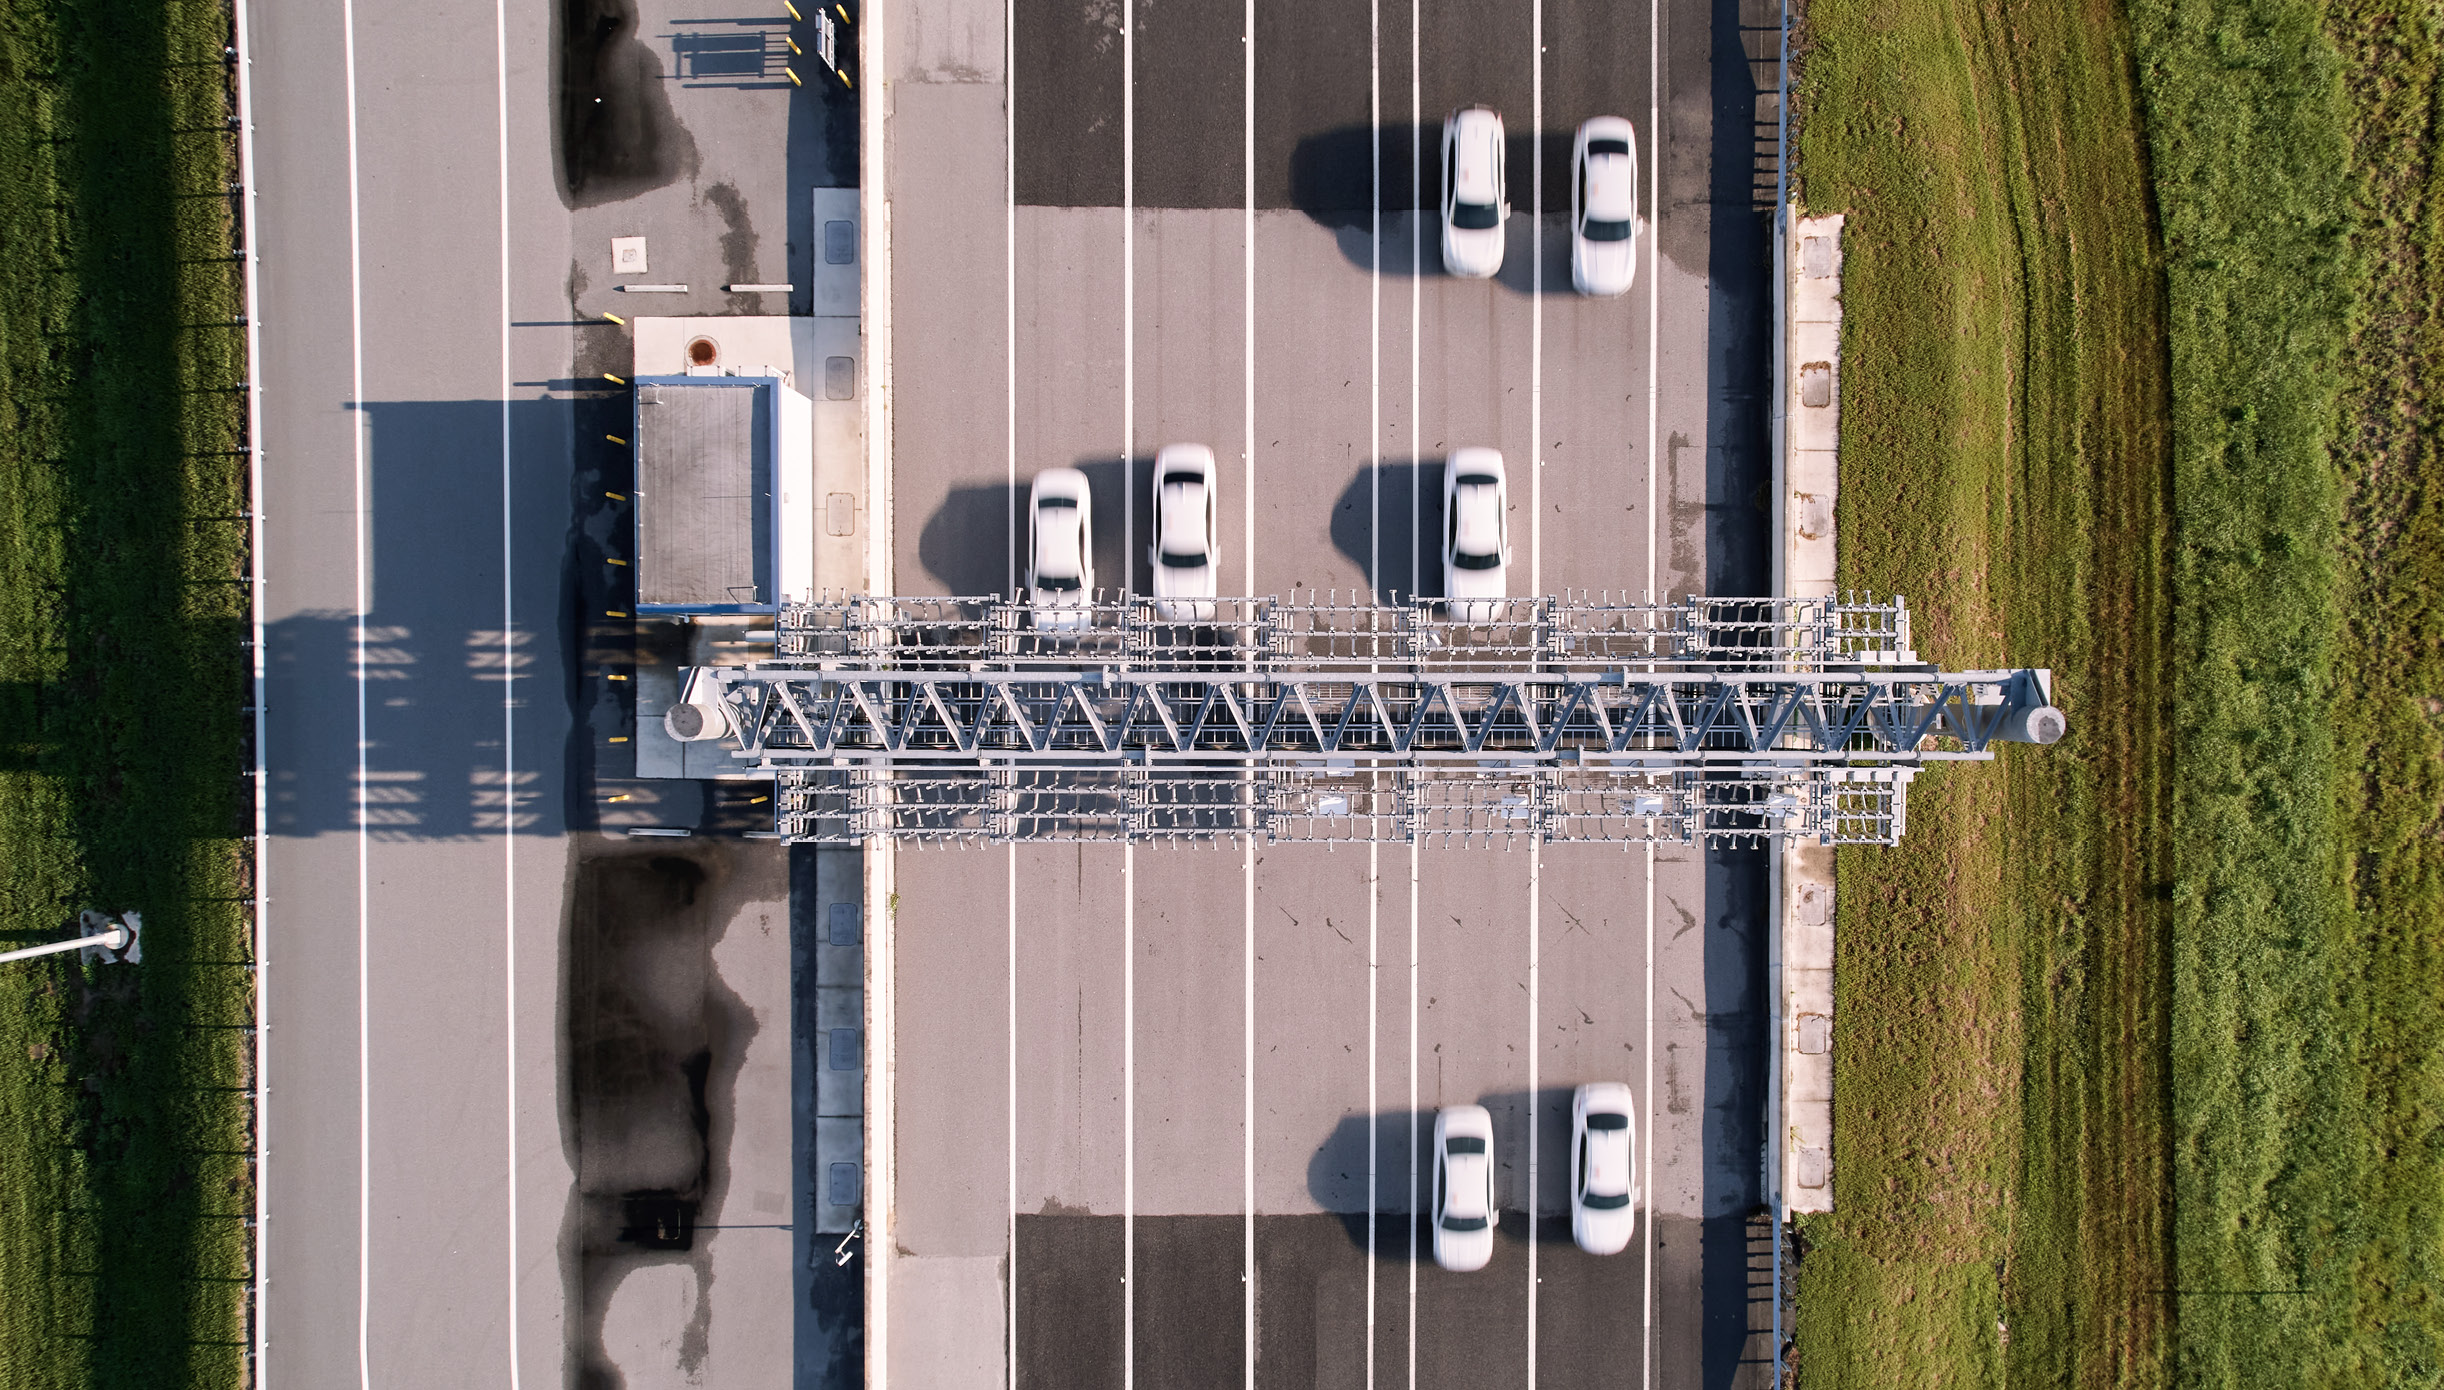 Aerial view of seven cars driving through one of the toll gantries on the high-speed oval